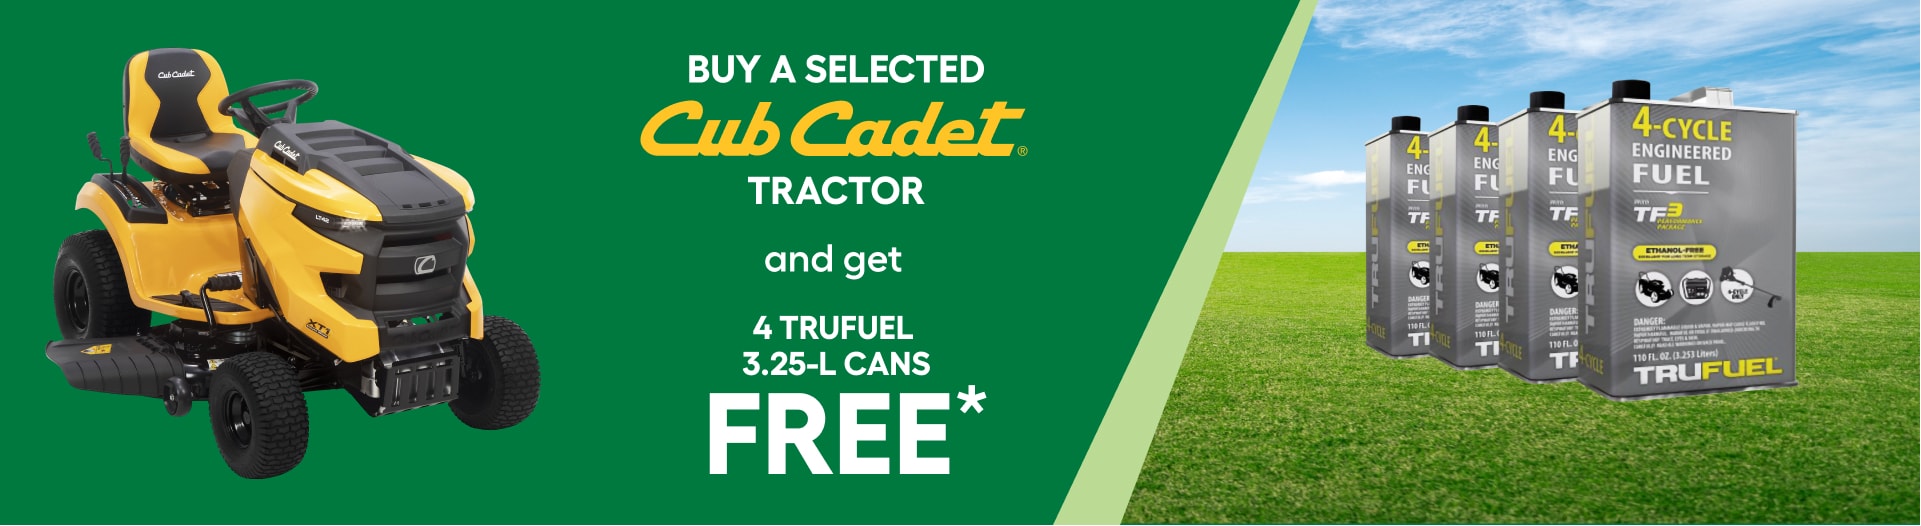 Promotion: Free fuel with the purchase of a selected Cub Cadet tractor 